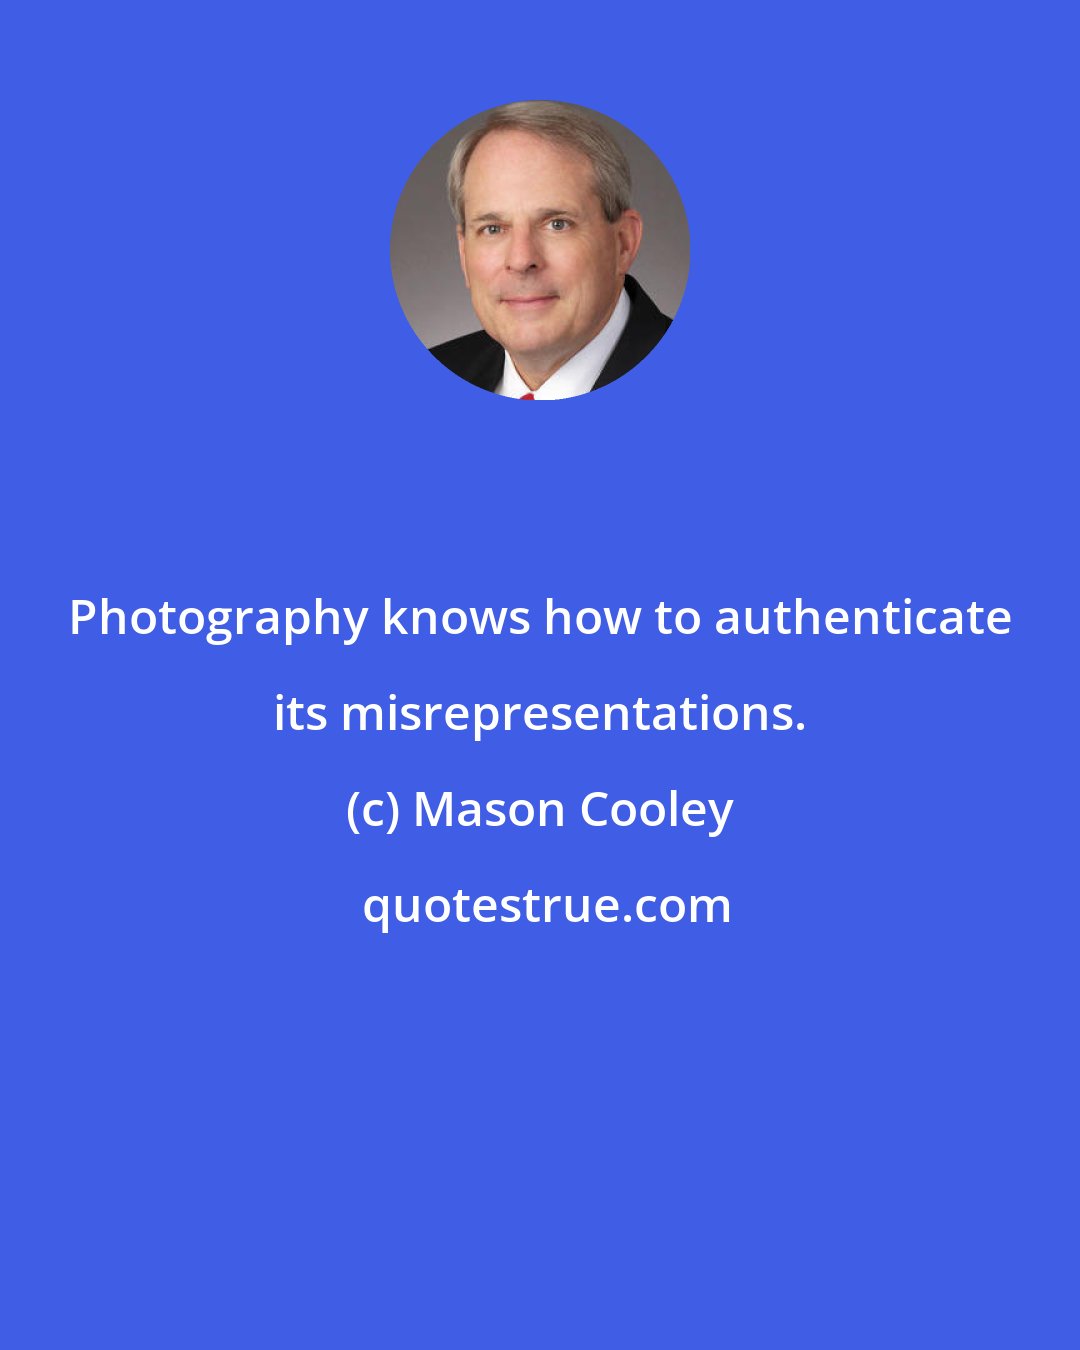 Mason Cooley: Photography knows how to authenticate its misrepresentations.